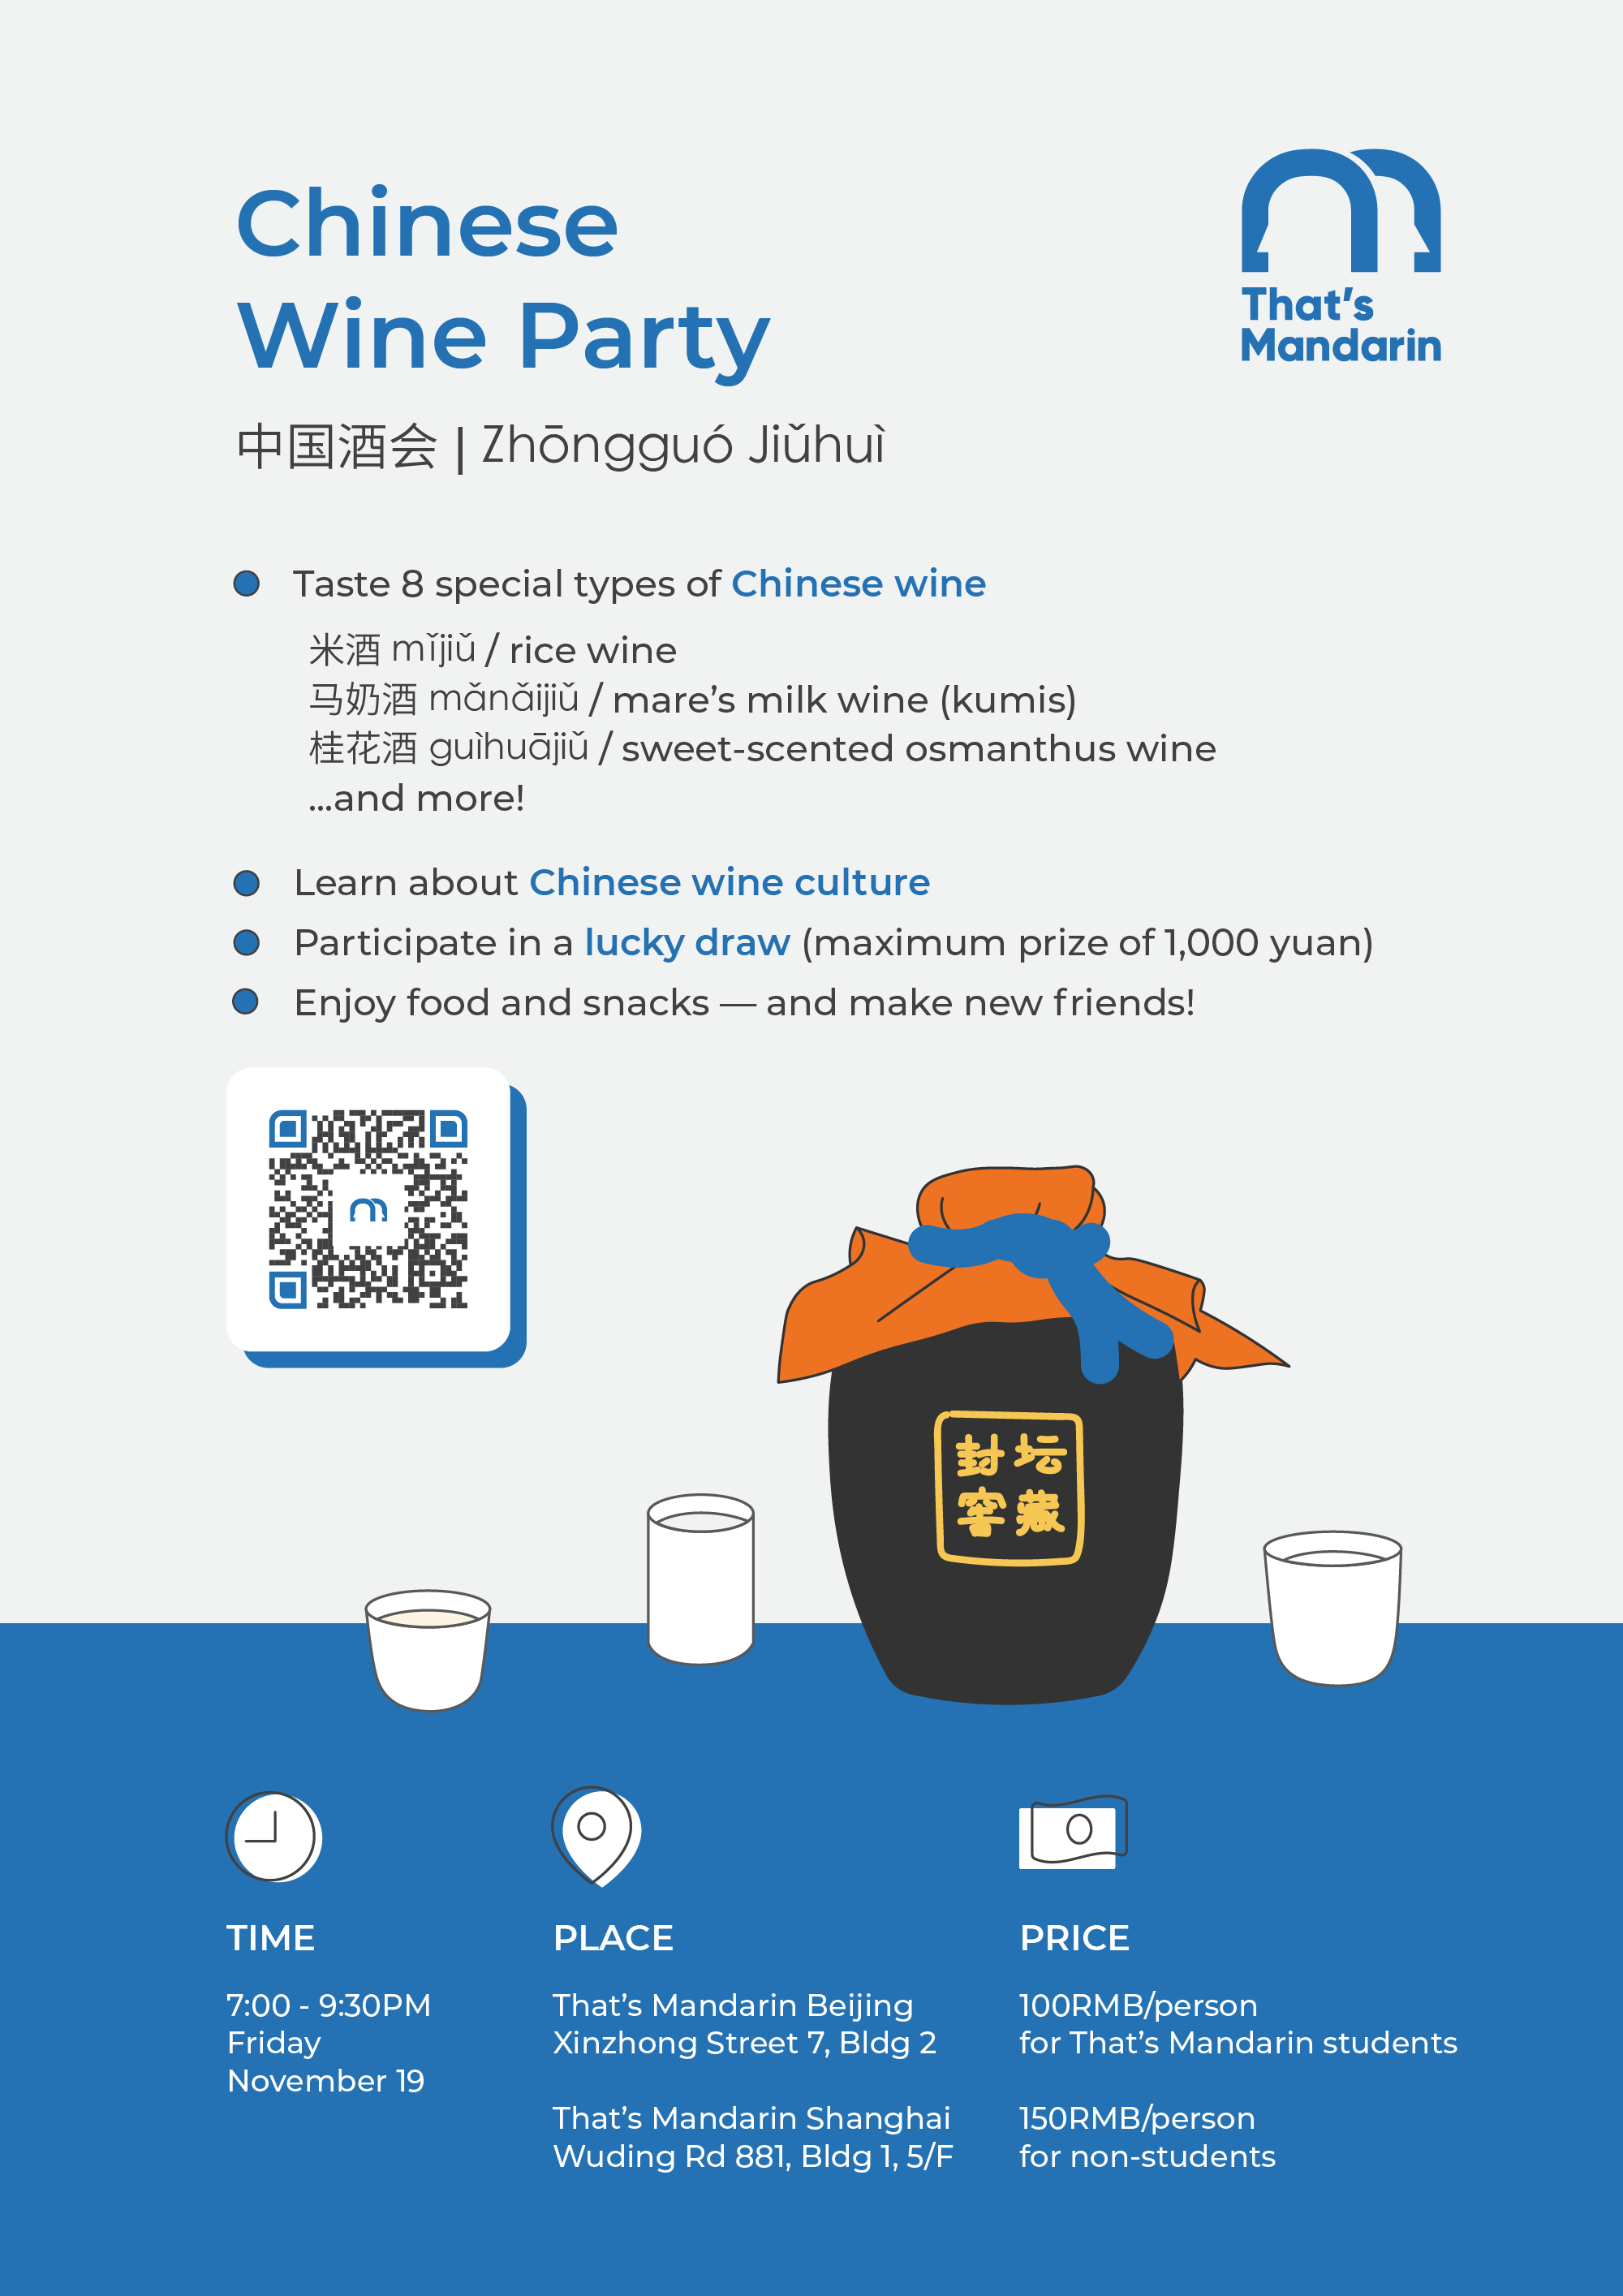 Chinese Wine Party (Nov 19)